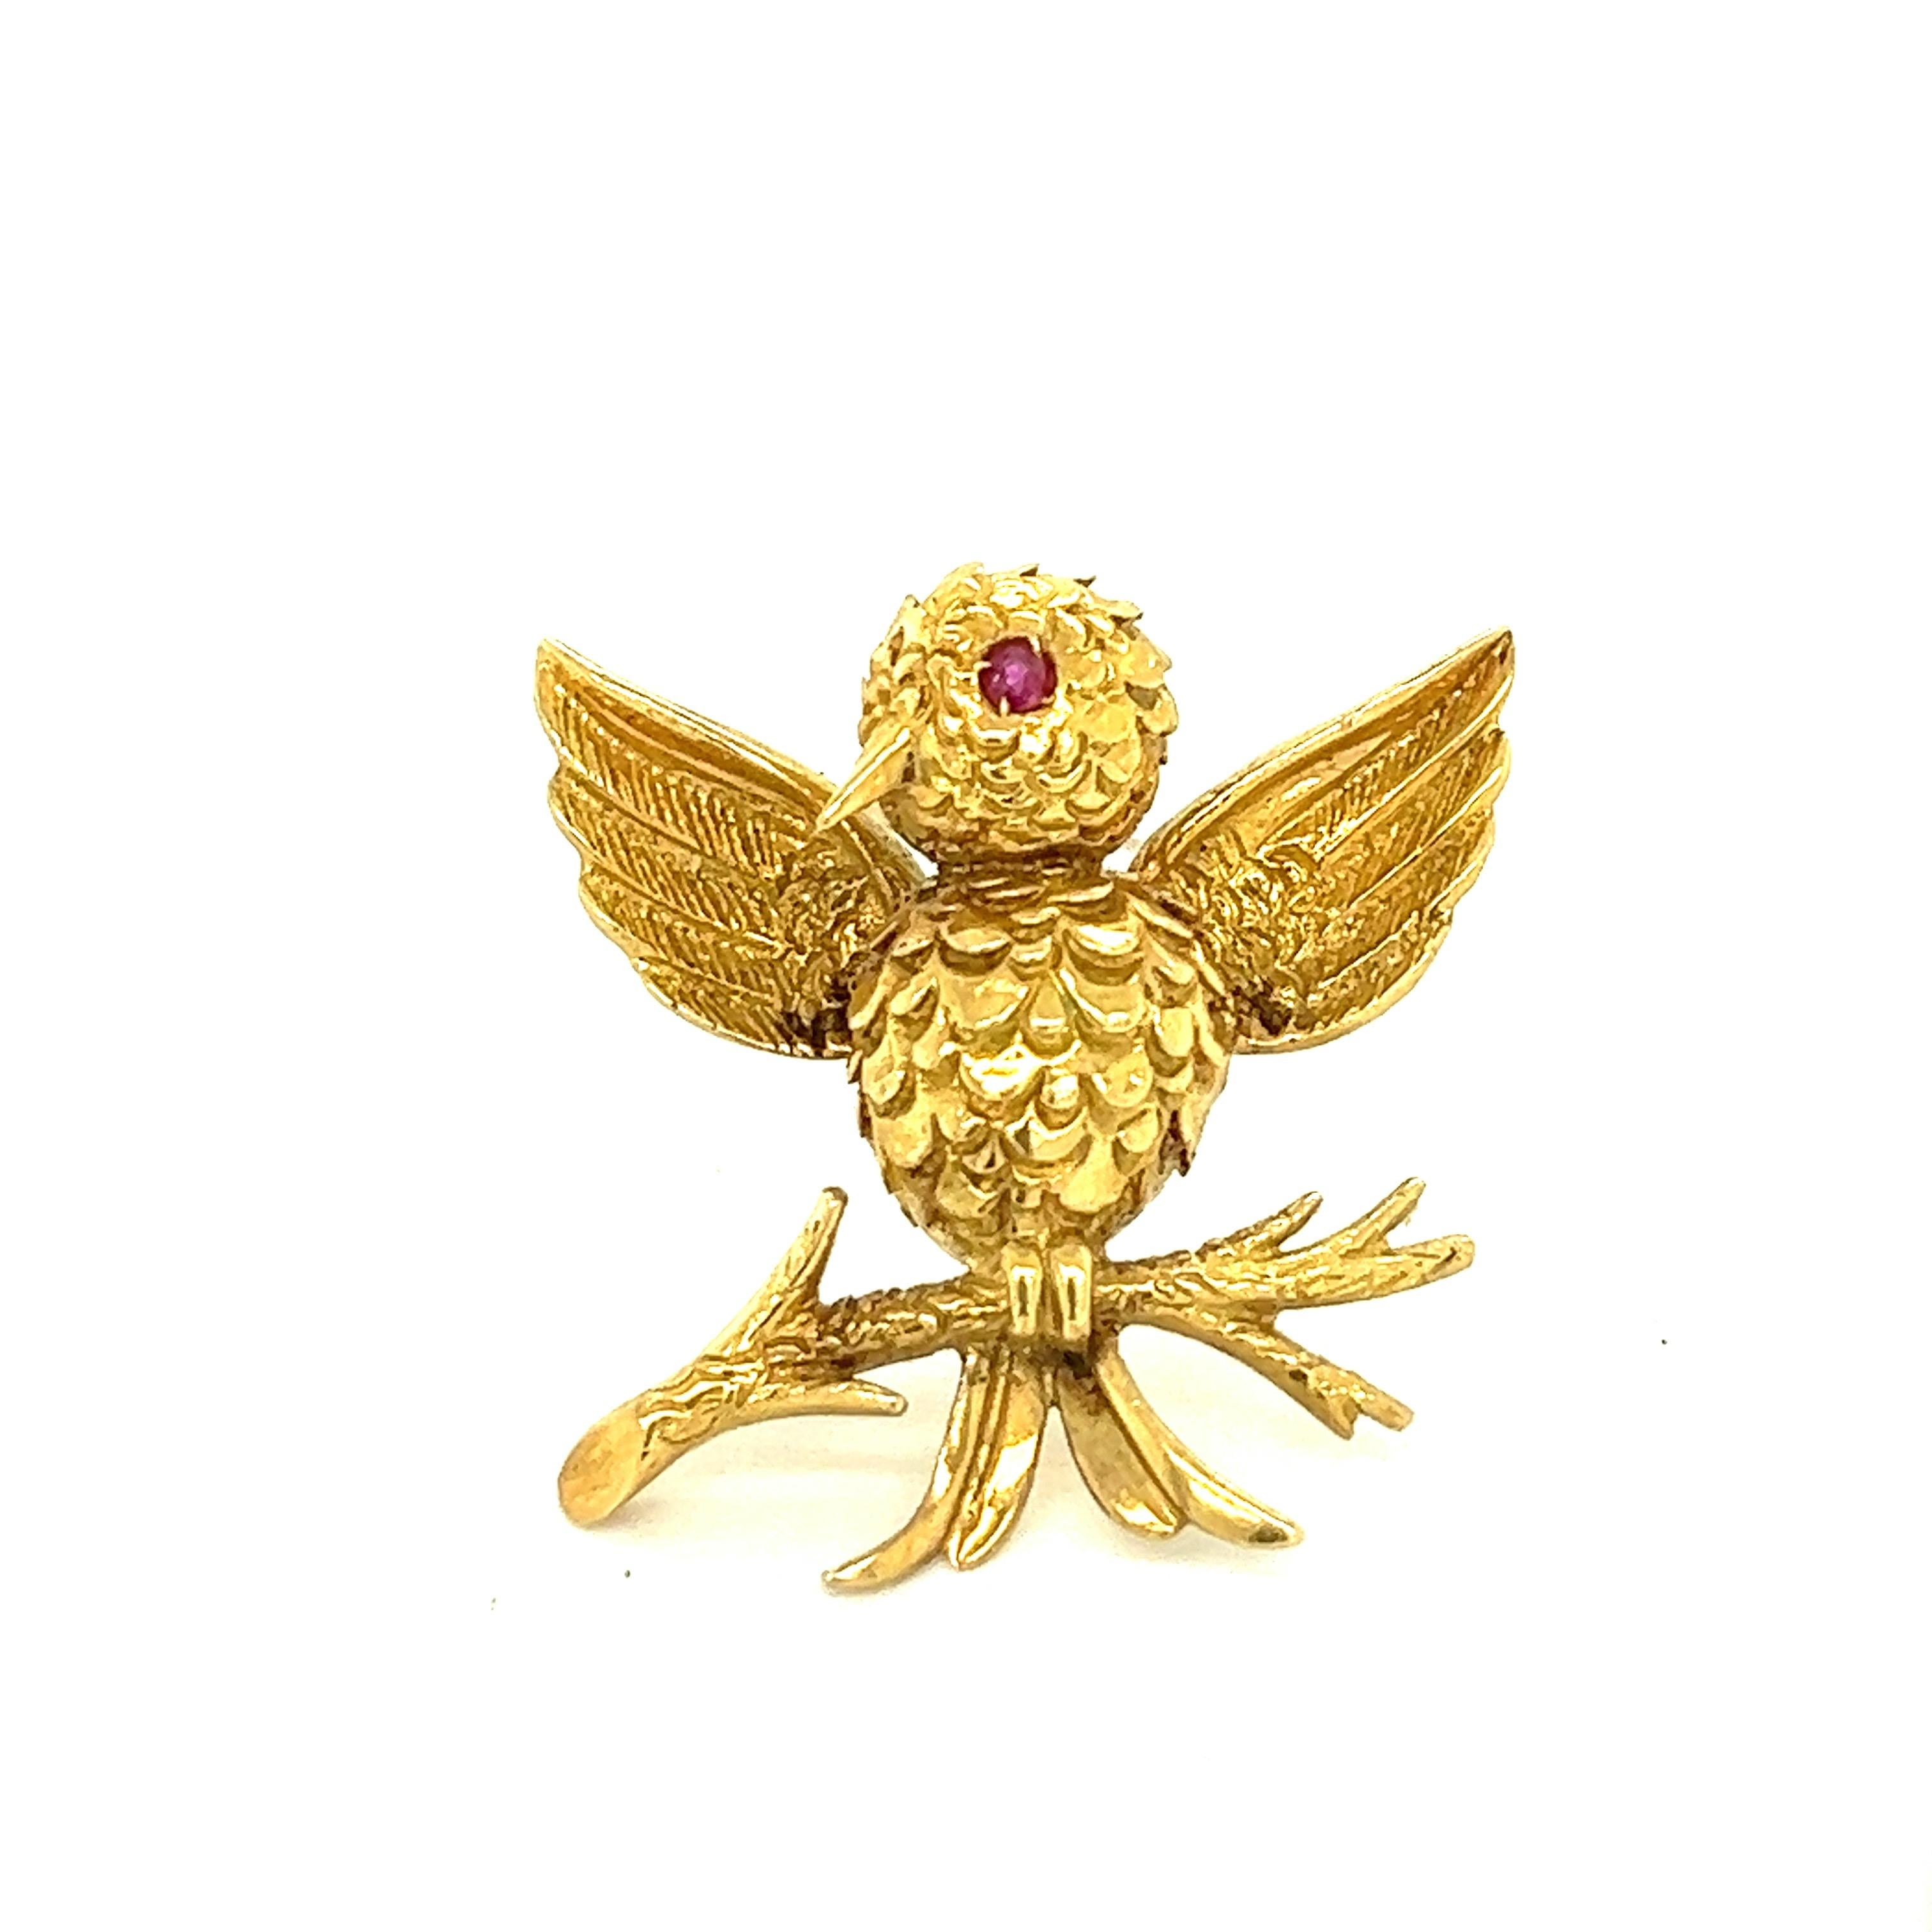 Tiffany & Co. Small Ruby 18k Yellow Gold Bird Brooch

A small textured bird on a single branch with a round-cut ruby for the eye; marked Tiffany & Co., personalized marks (HWR, CHM, 10-6-72)

Size: width 2.8 cm, length 2.8 cm
Total weight: 8.8 grams